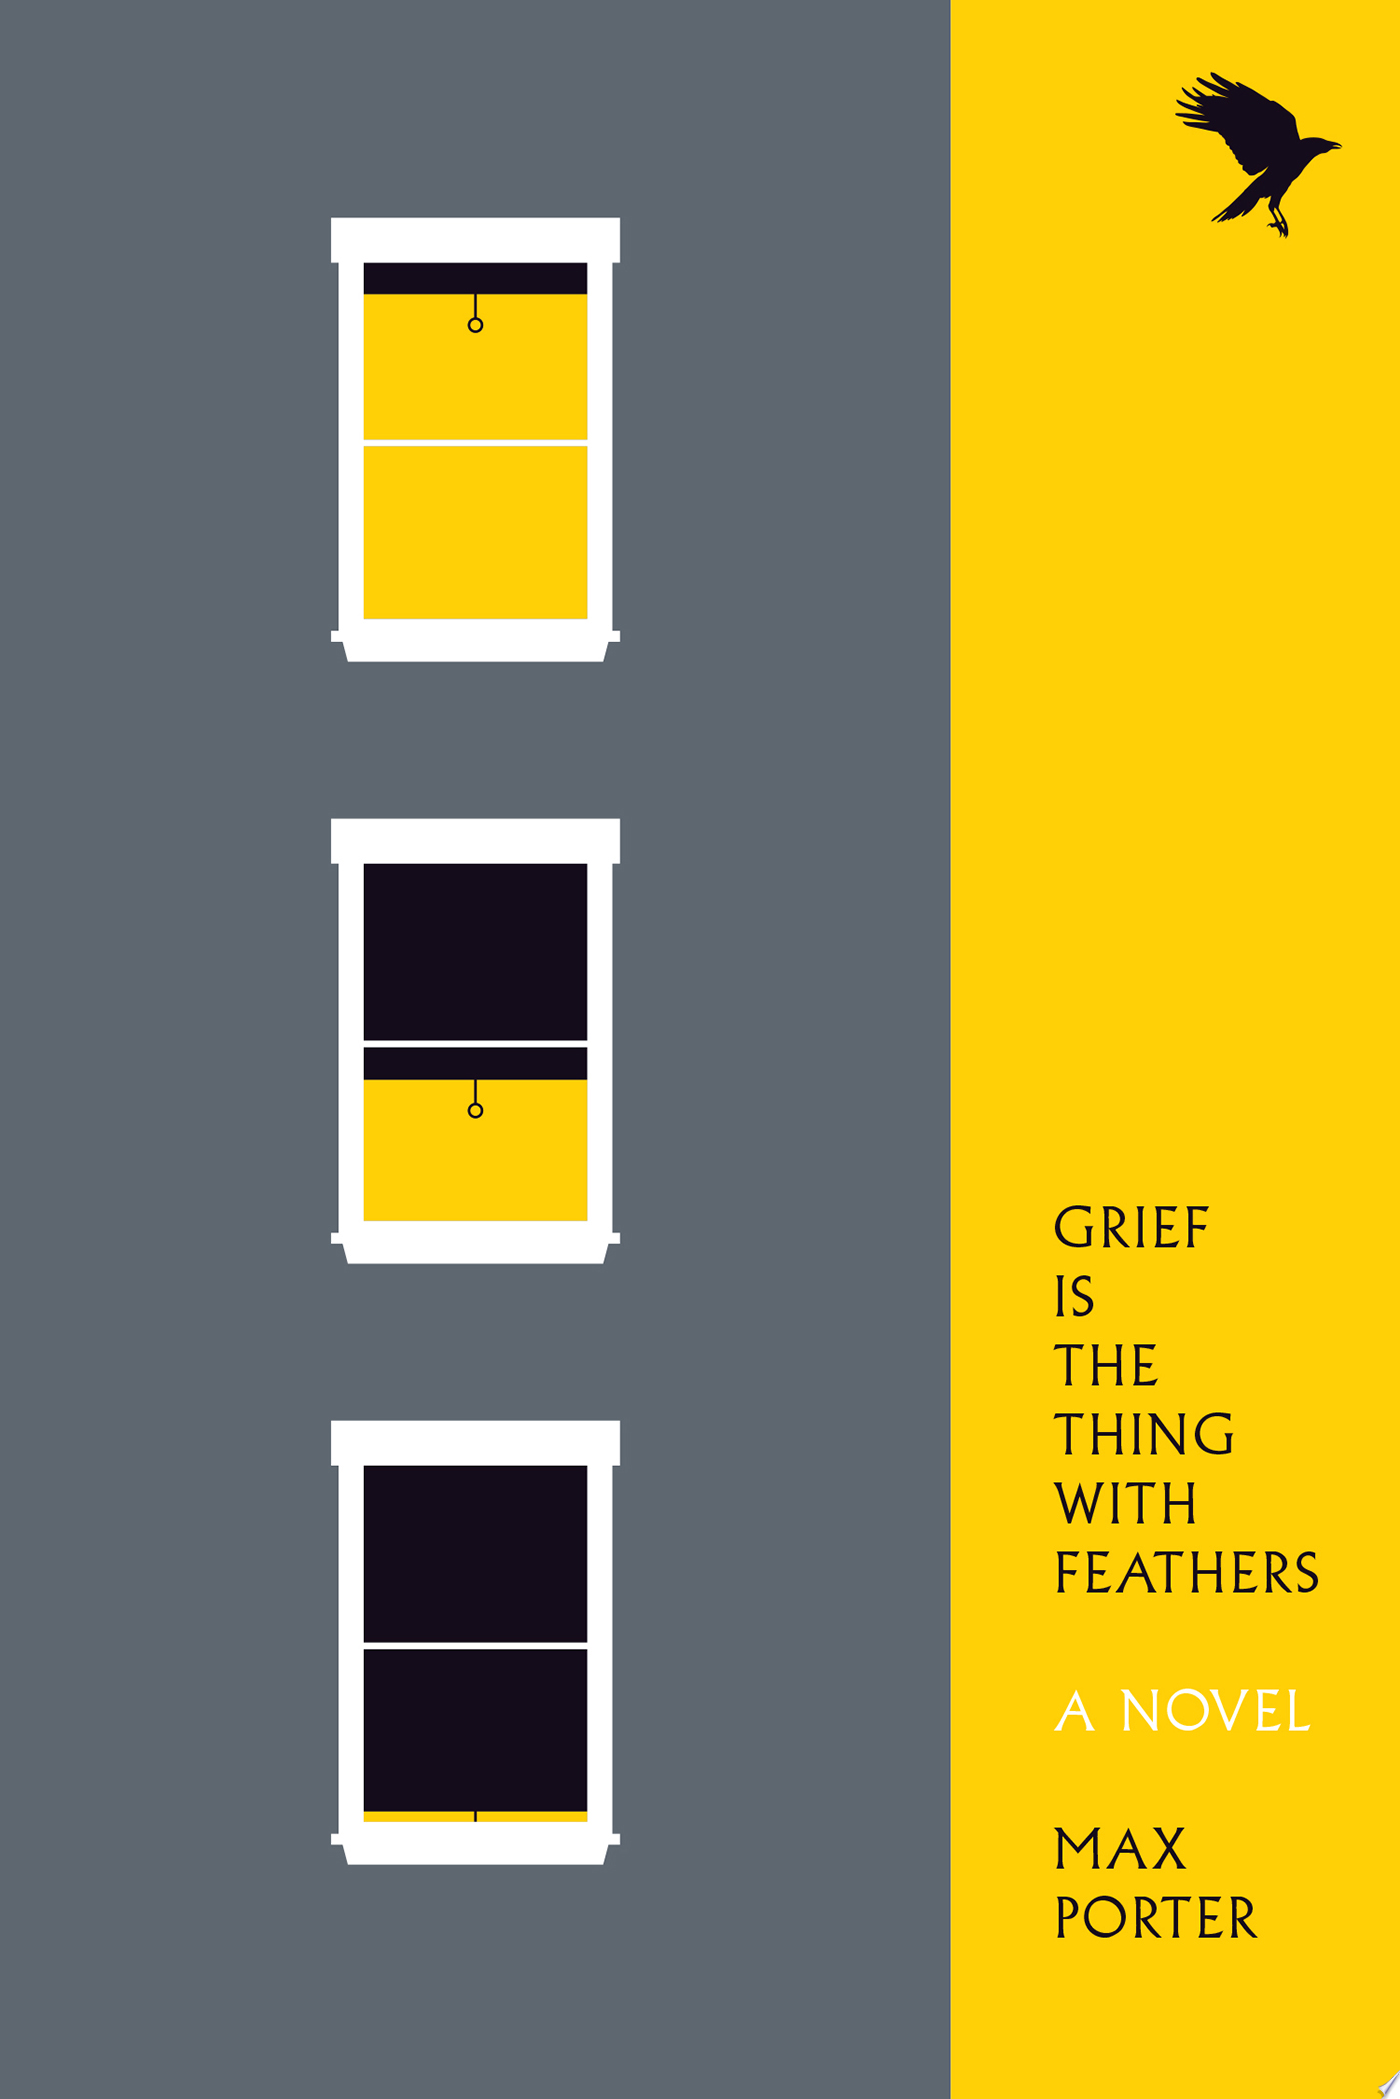 Image for "Grief Is the Thing with Feathers"